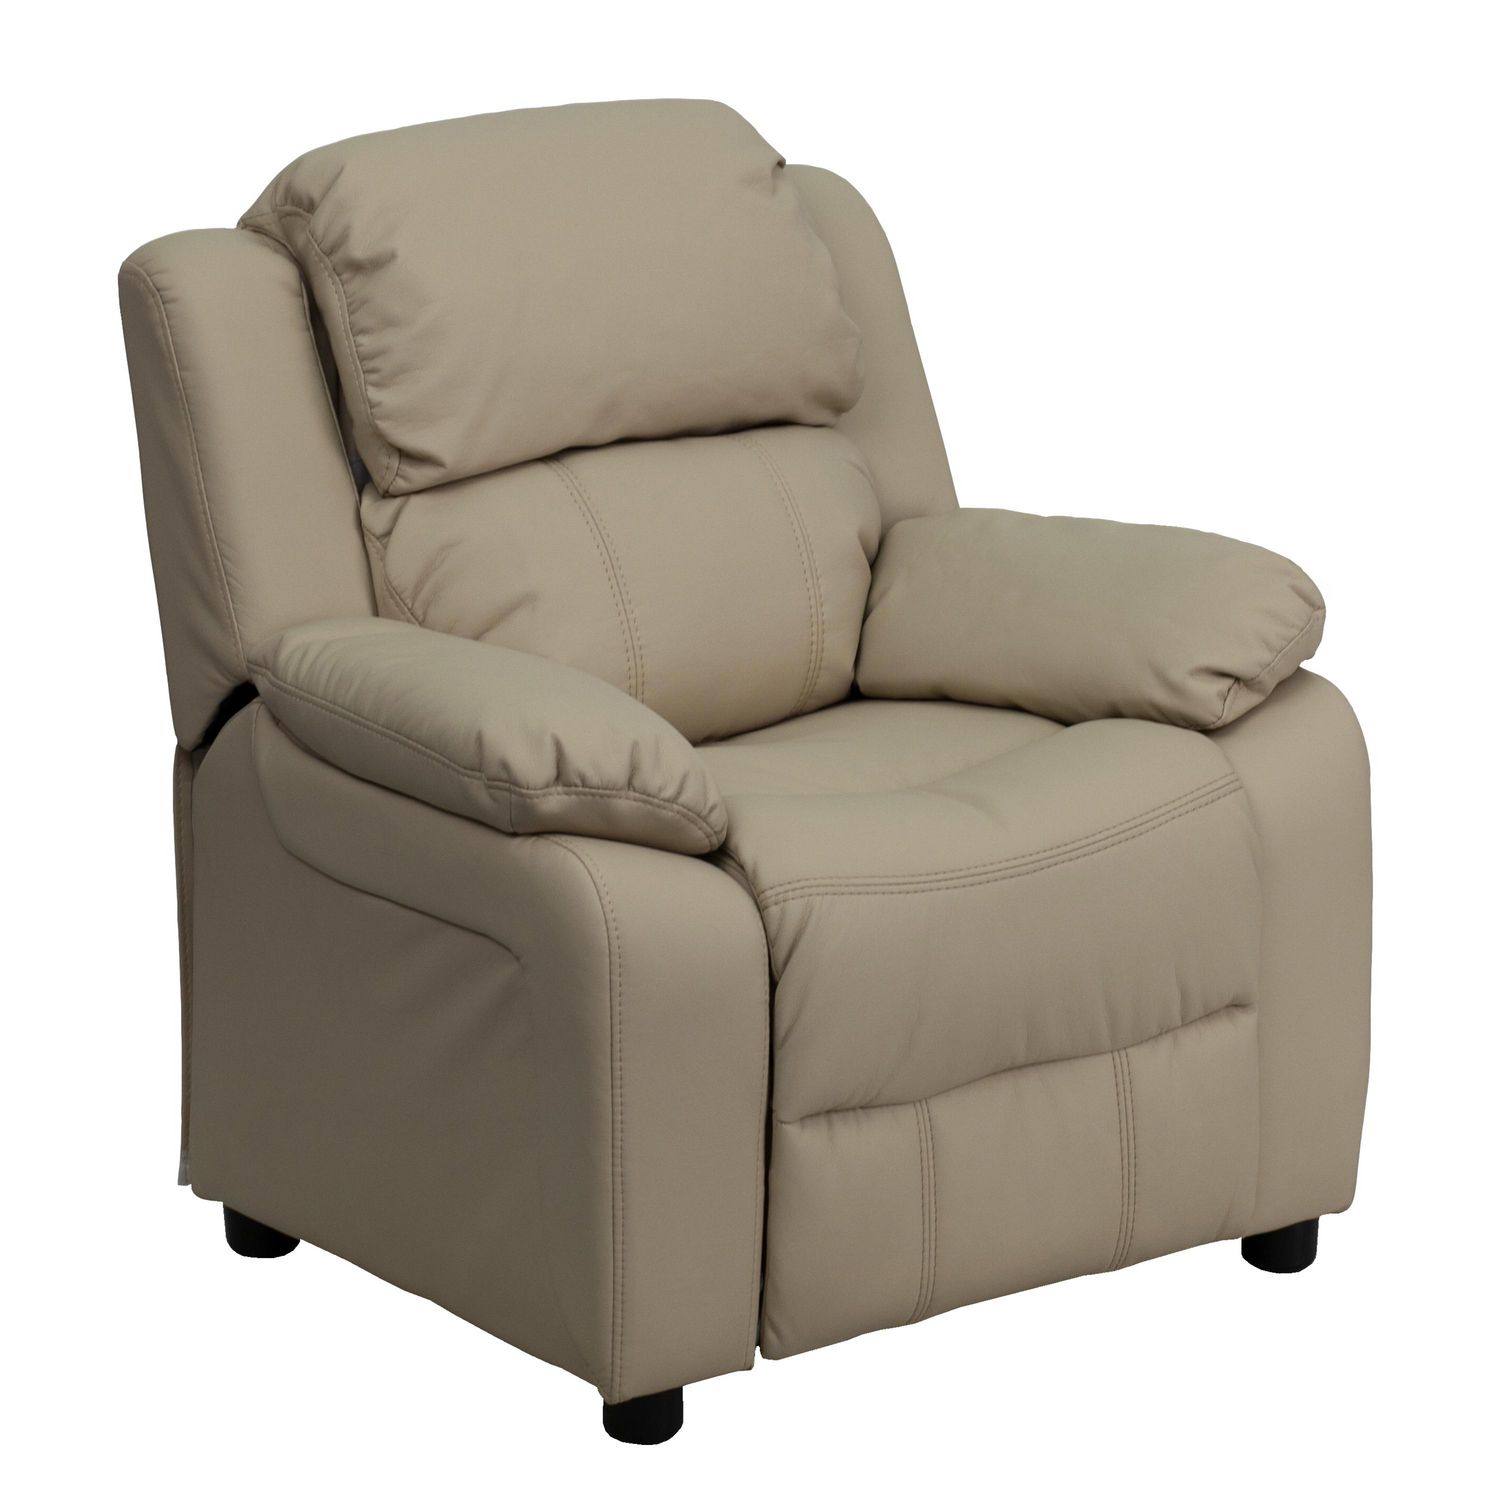 Deluxe Padded Contemporary Beige Vinyl Kids Recliner with Storage Arms ...